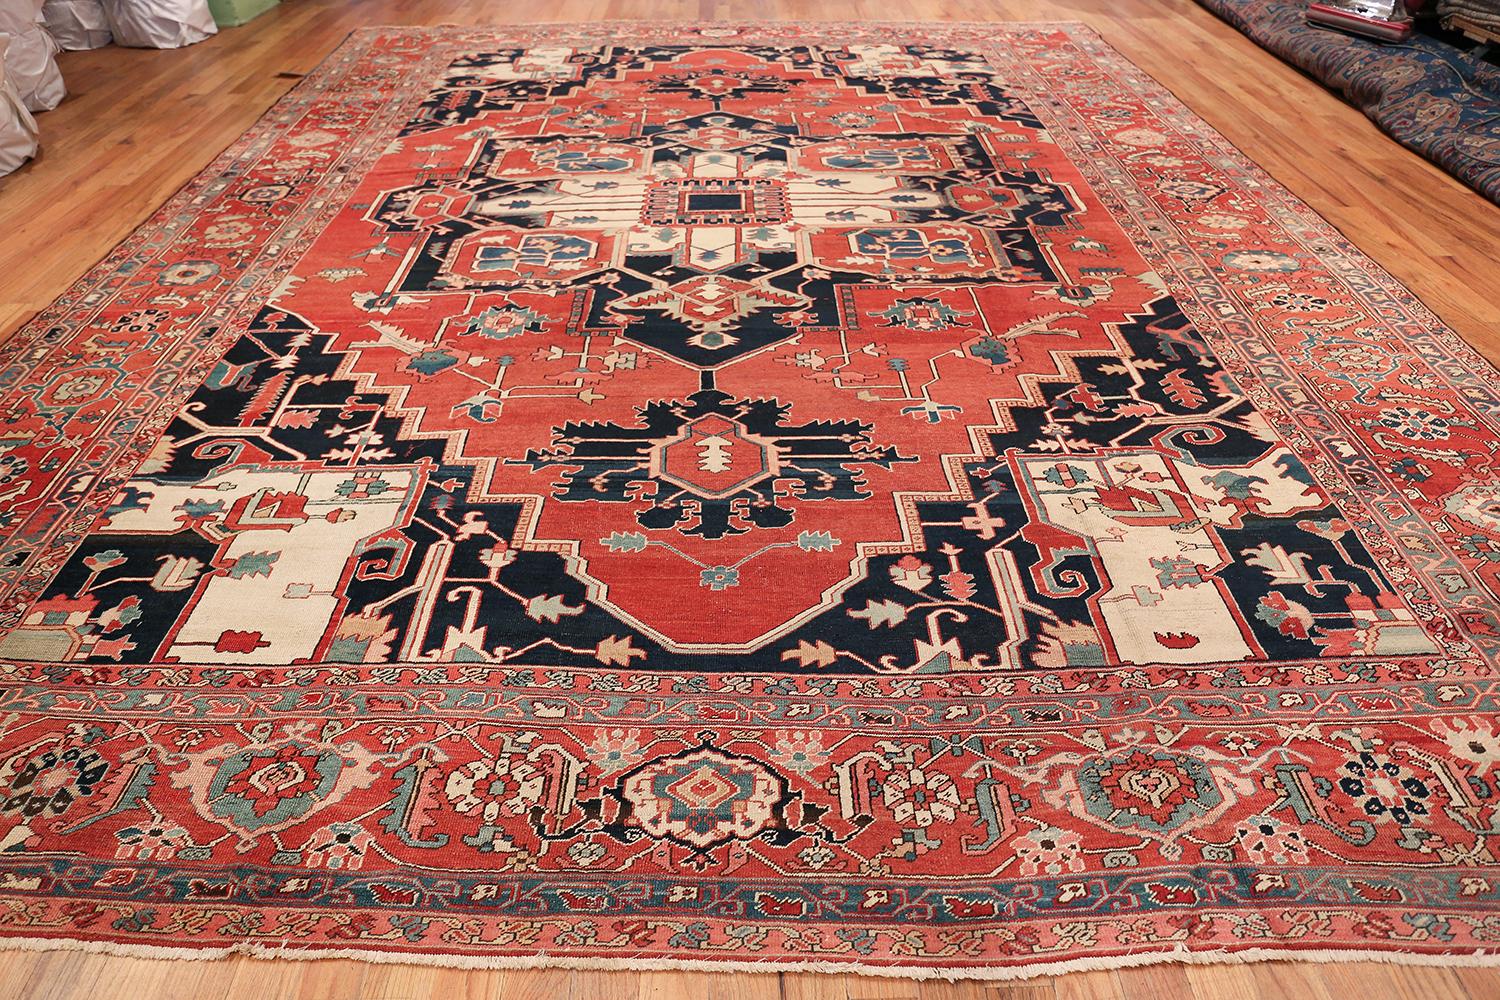 Breathtaking large antique Persian Serapi rug, country of origin / rug type: Persian rug, date circa 1900
The Persian Serapi rugs belong to a family of regional Persian rugs. These rugs were produced in the Iranian province of Eastern Azerbaijan